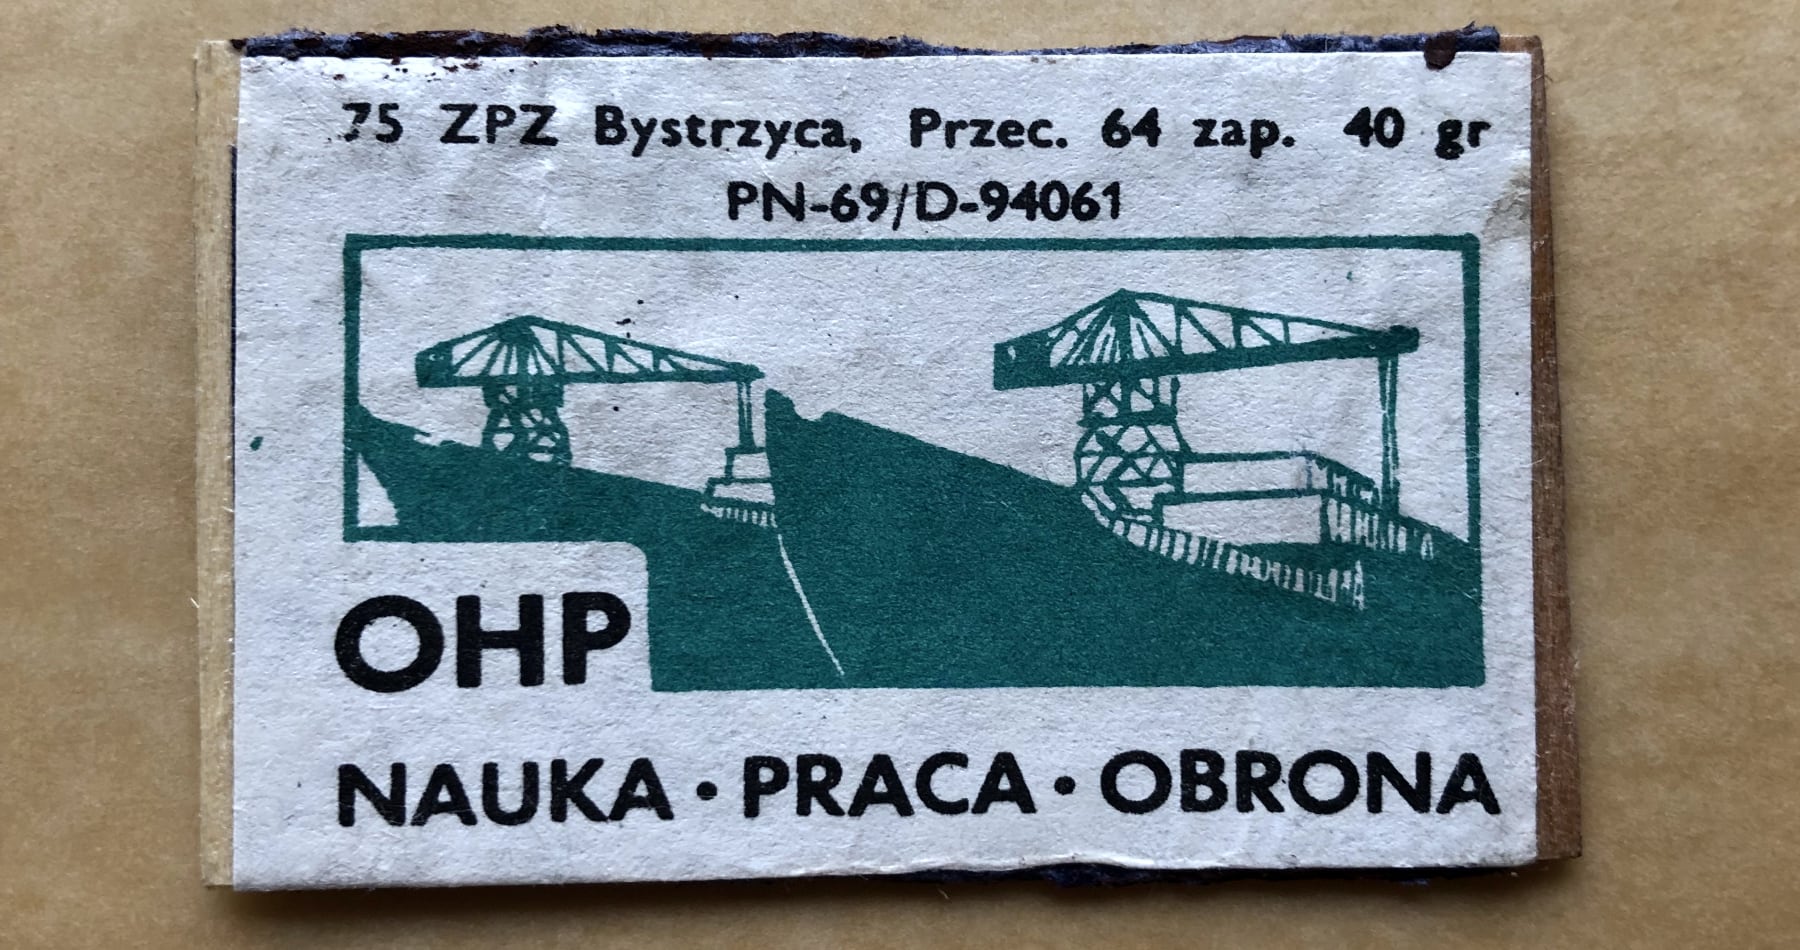 Photo: An old Polish matchbox cover (from the Polish People's Republic)